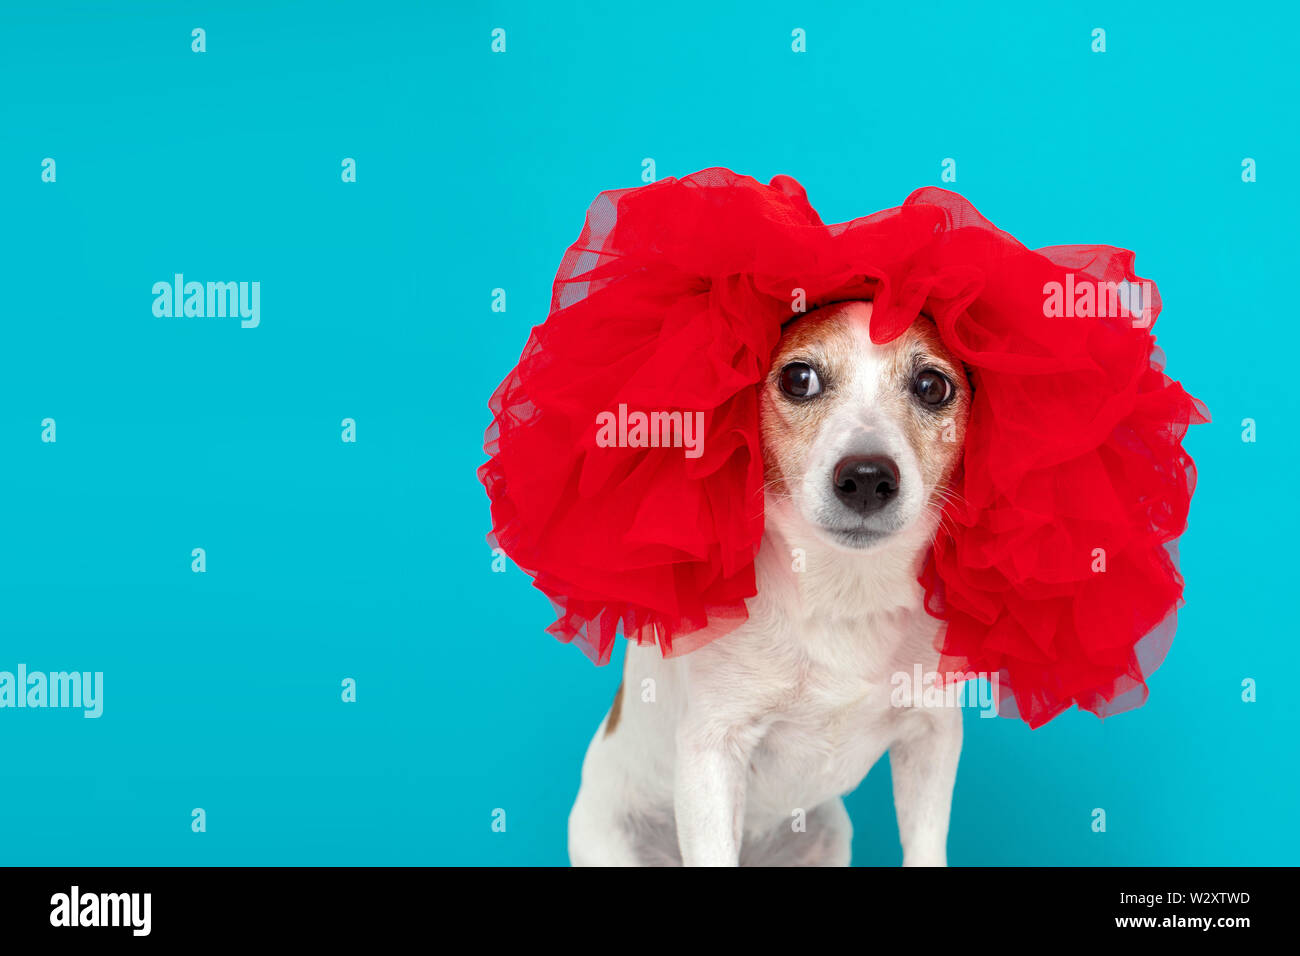 Adorable small dog in red wig Stock Photo